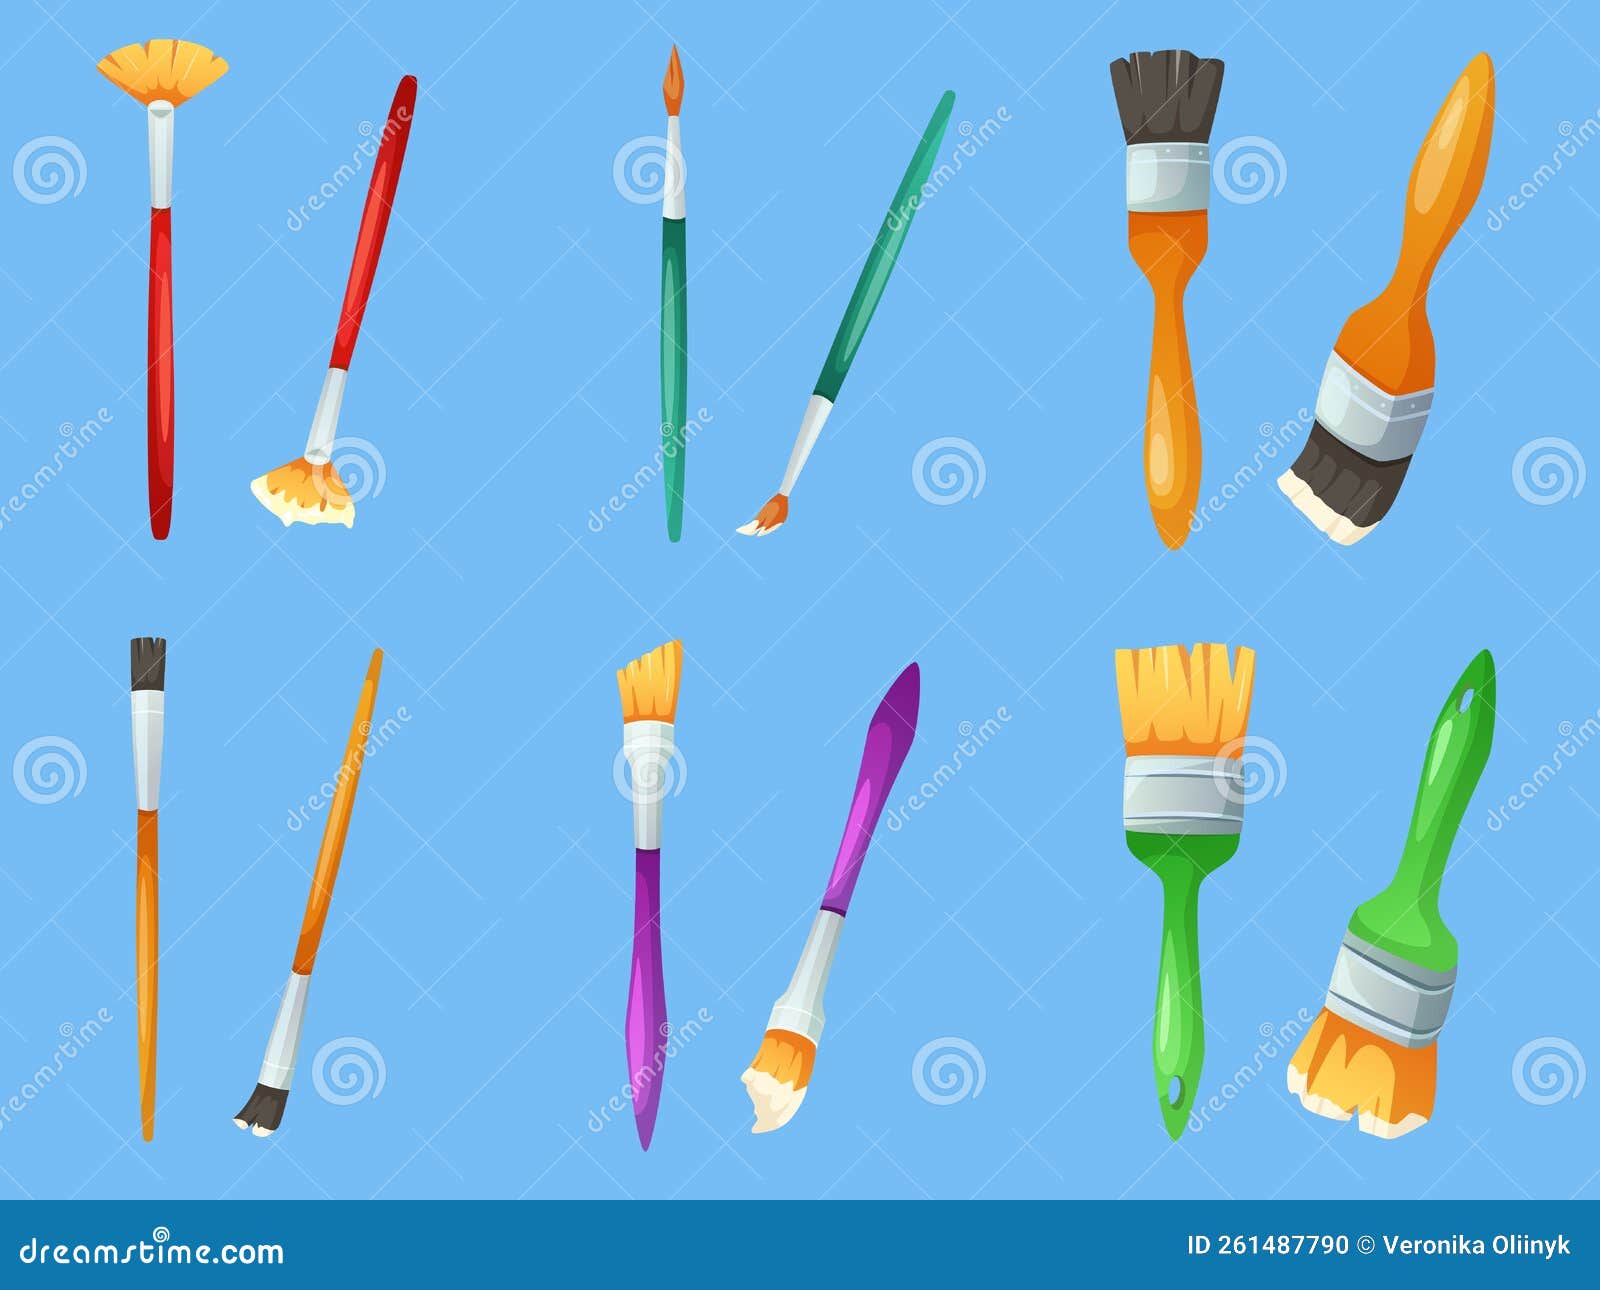 Cartoon paint brush. Painter instruments, different size brushes with paint  for drawing and painting vector objects set, Stock vector